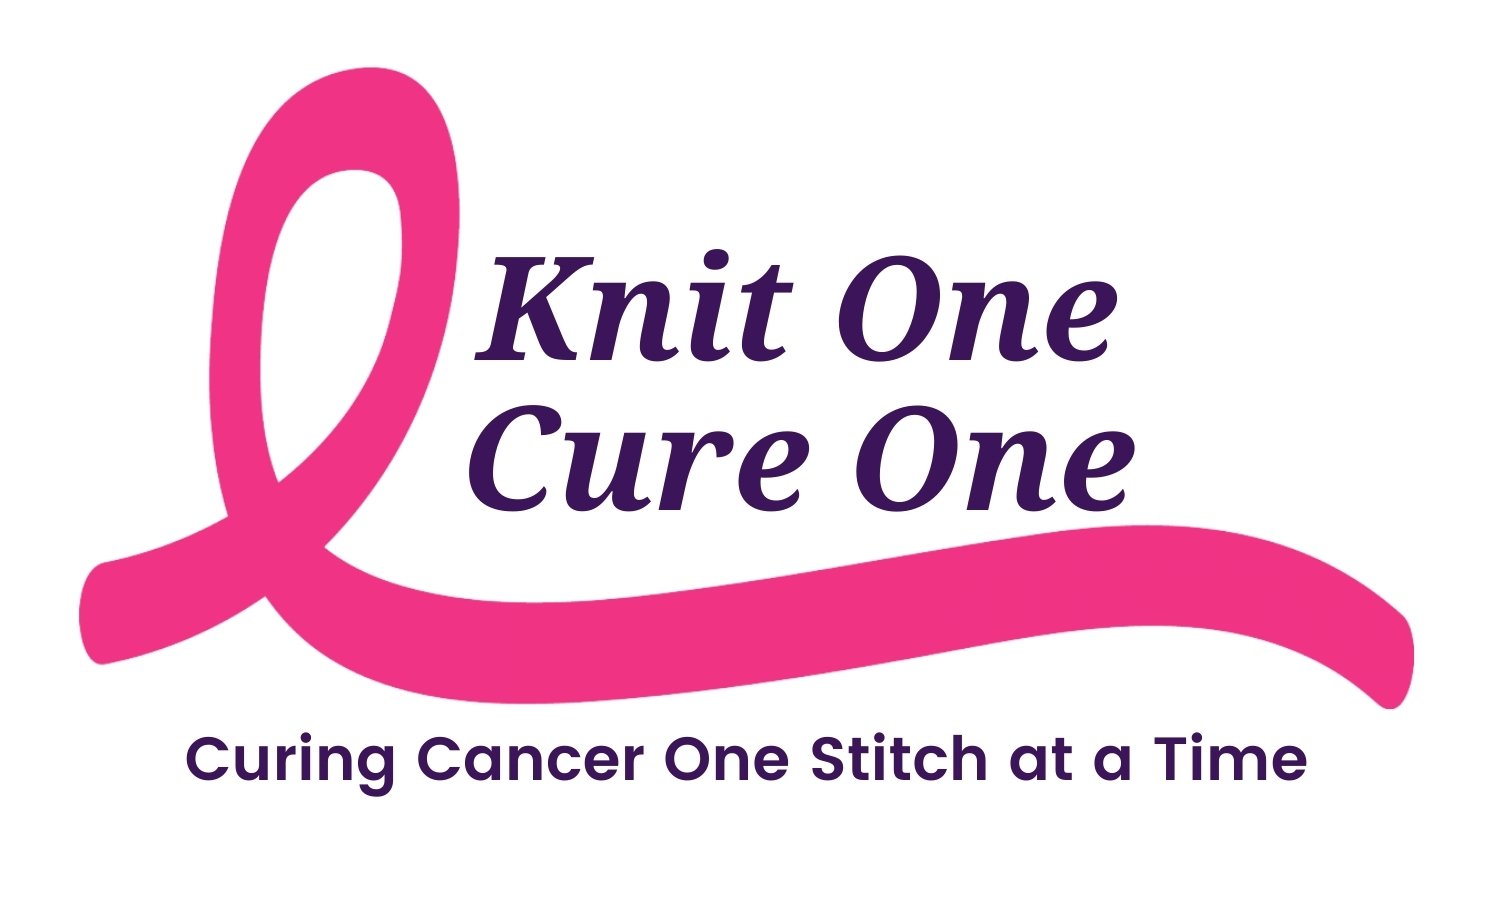 knitonecureone.org